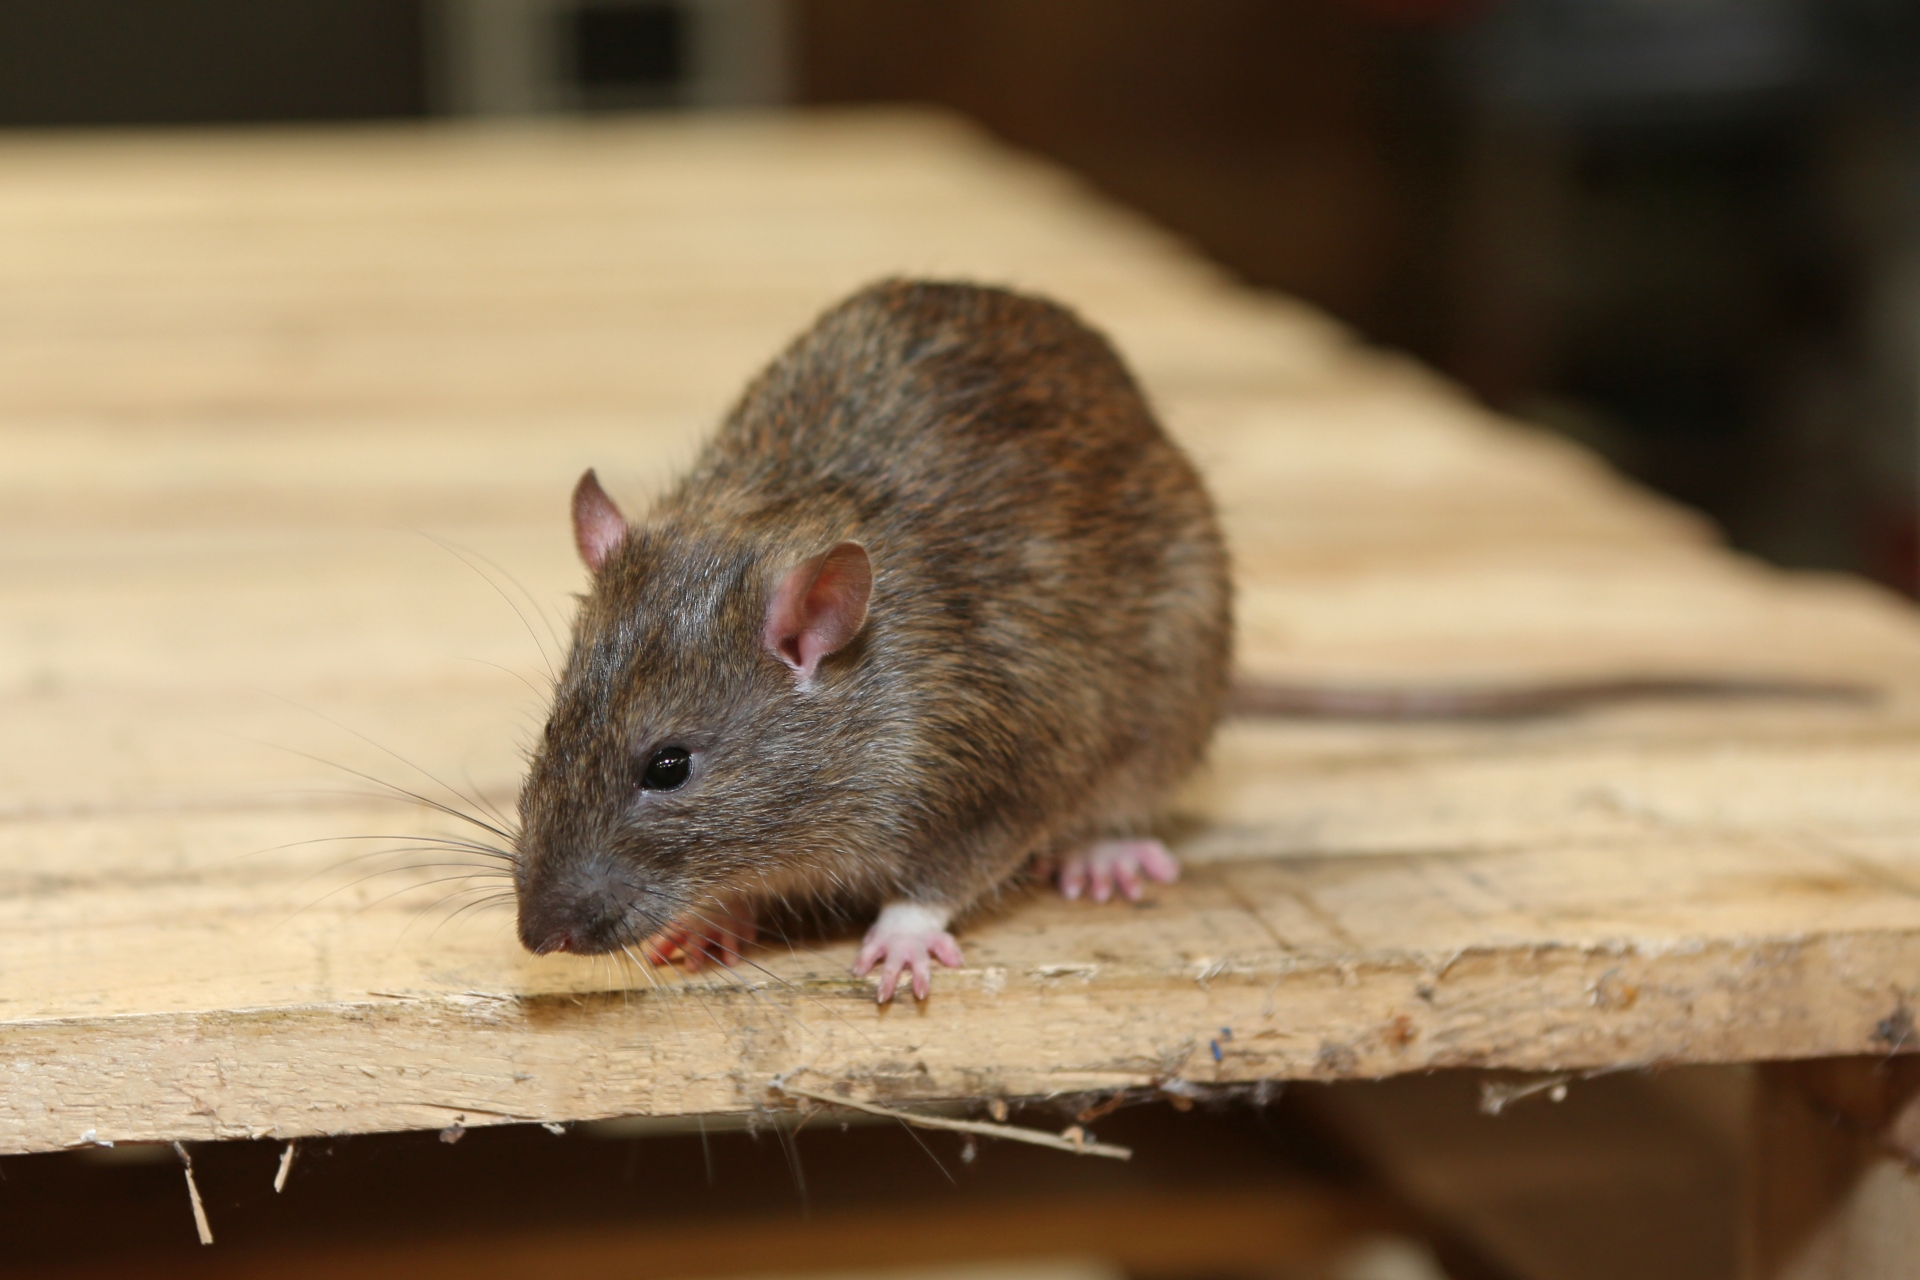 Rat extermination, Pest Control in Stockwell, SW9. Call Now 020 8166 9746